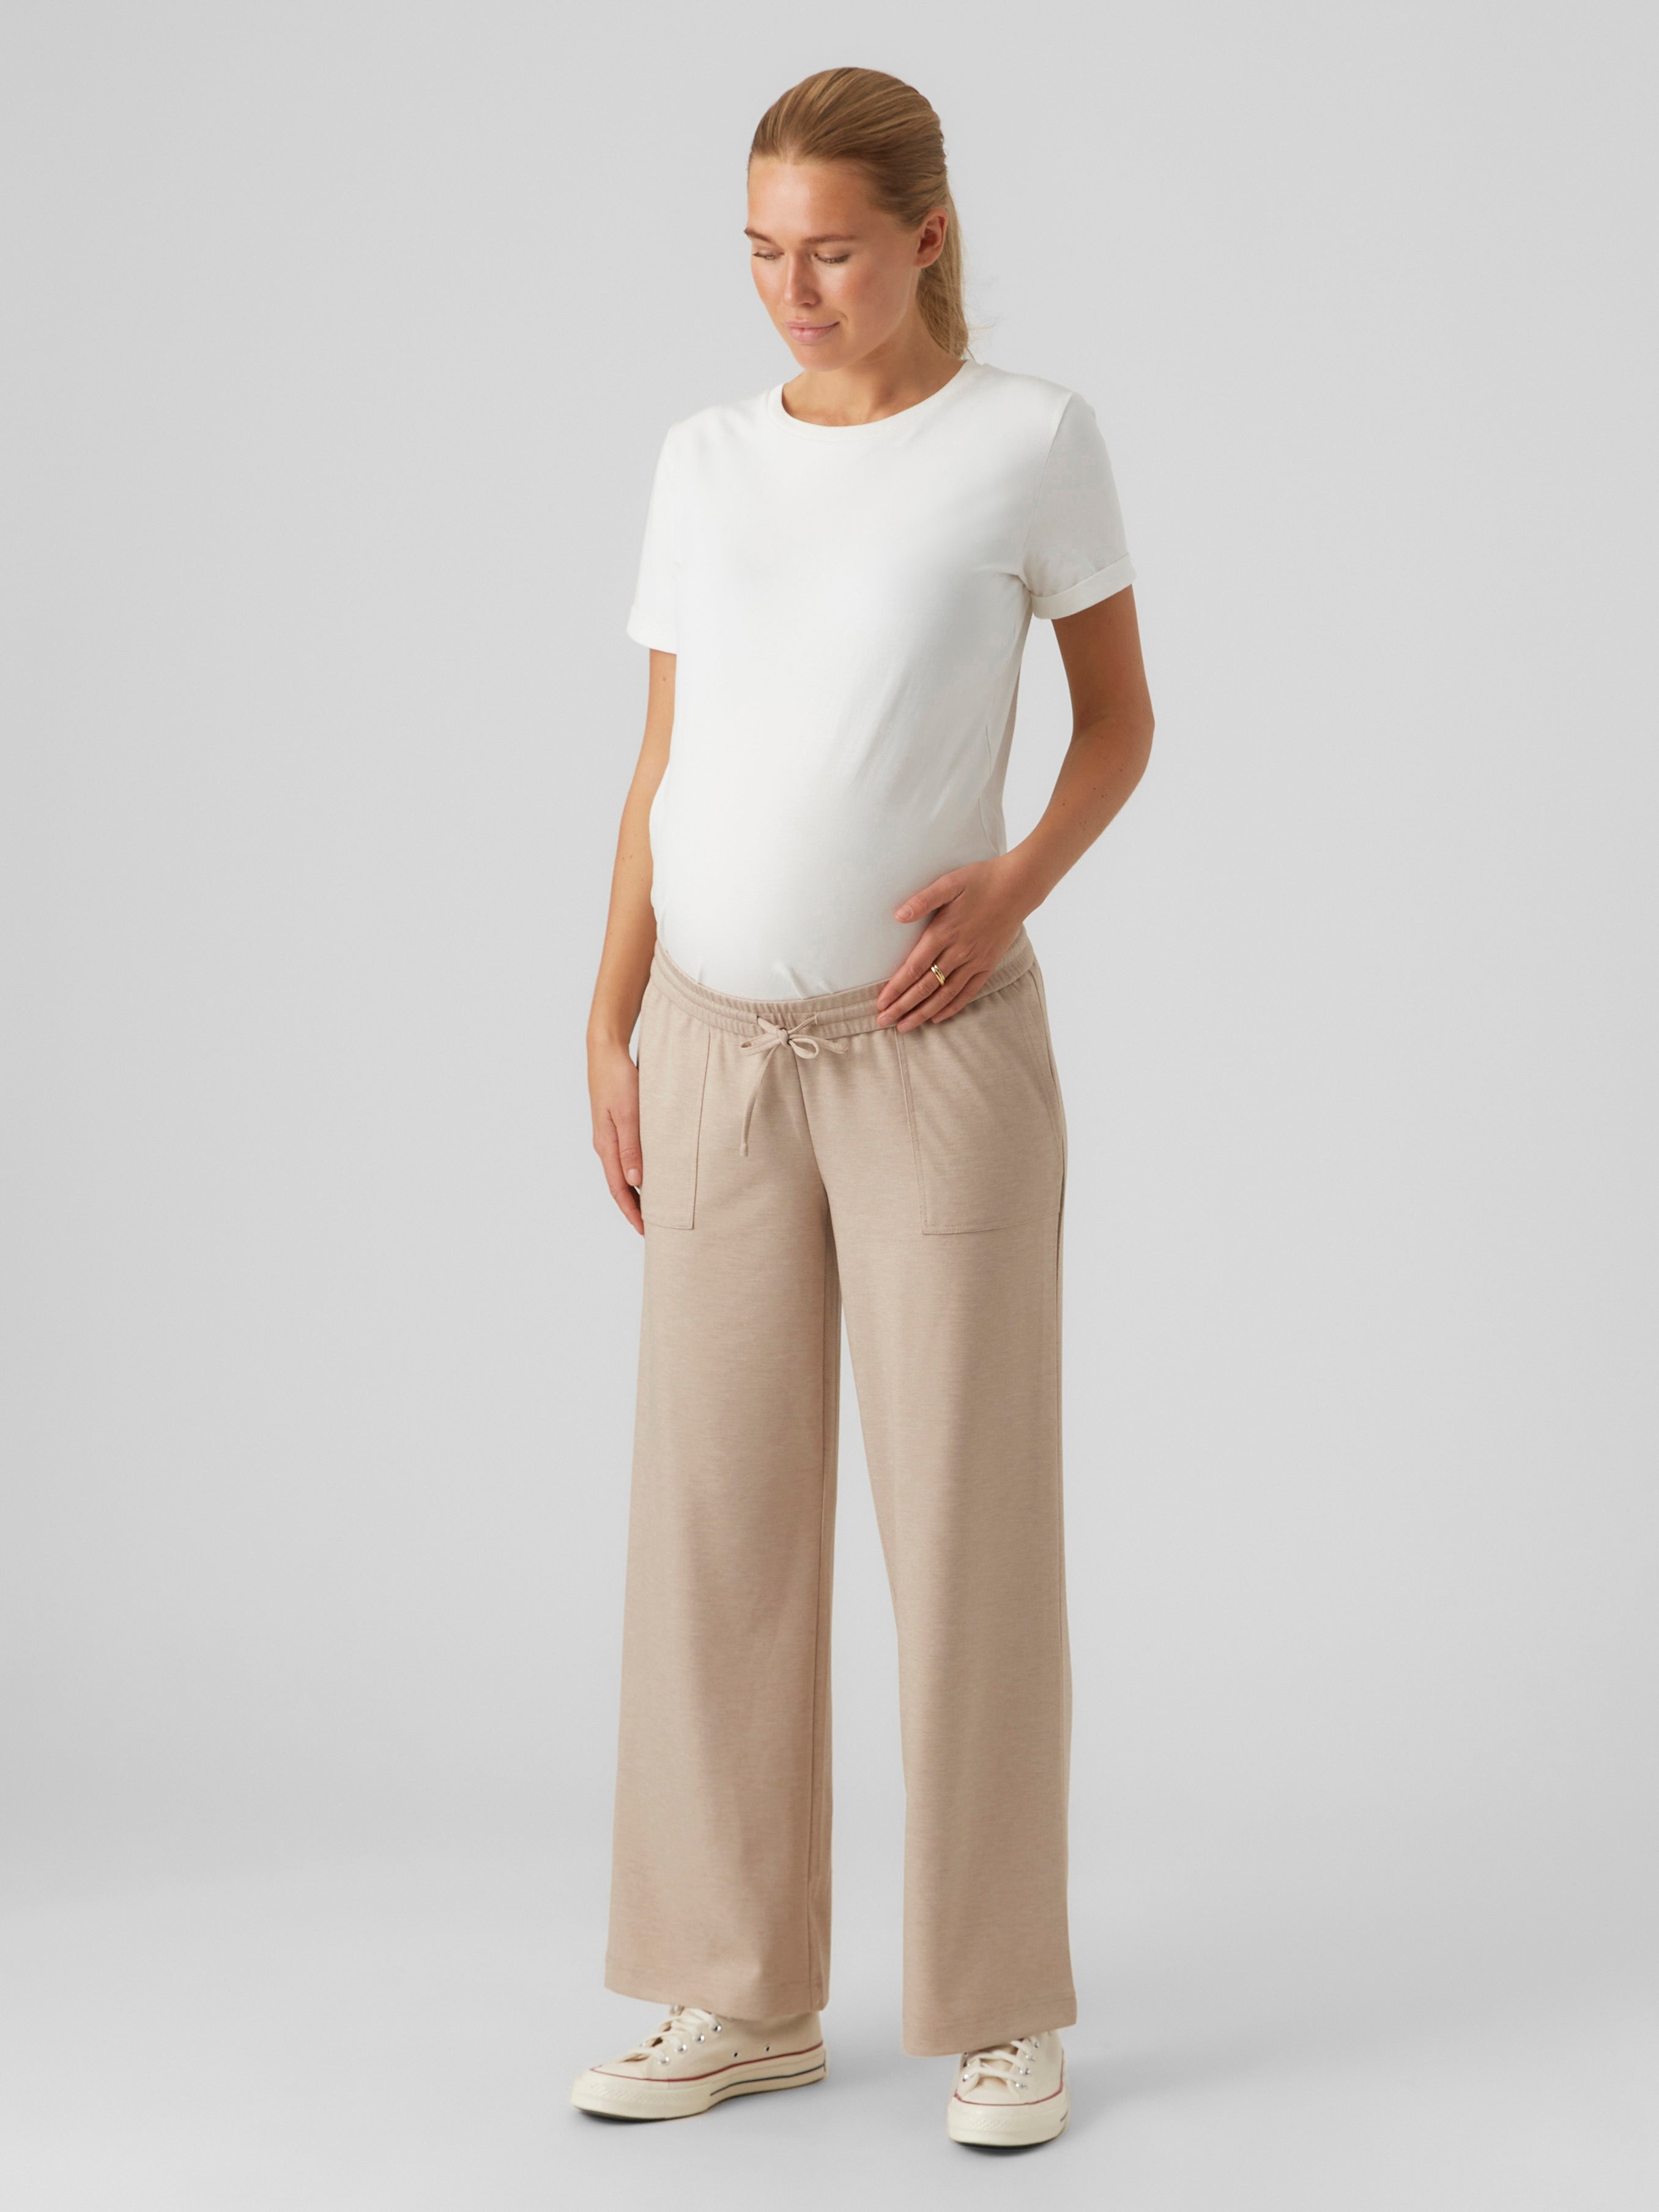 Linen Maternity Trousers (White) - Maternity Wedding Dresses, Evening Wear  and Party Clothes by Tiffany Rose ES